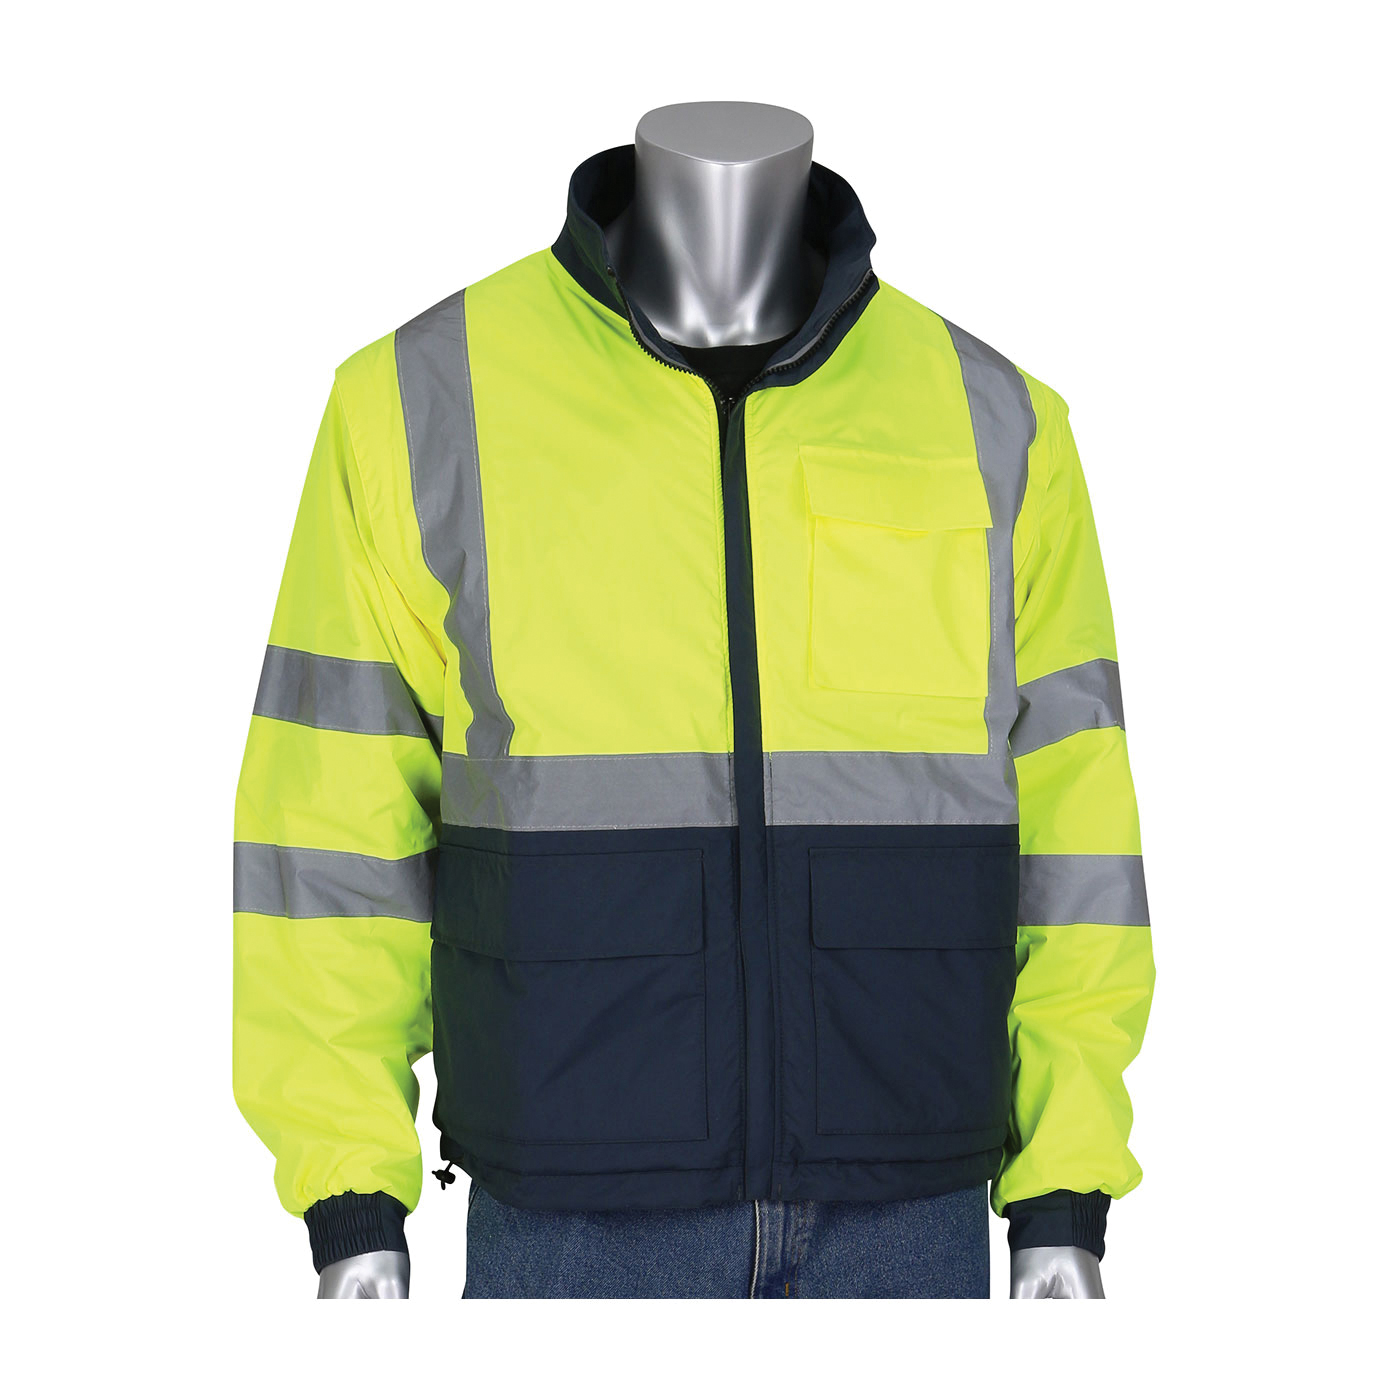 PIP® 333-1500-R/S 333-1500-R 4-in-1 Multi-Seasonal Lightweight Reversible Windbreaker Jacket With Detachable Sleeves, Dark Gray/Hi-Viz Lime Yellow, Polyester, 46-1/2 in Chest, Resists: Water, ANSI 107 Type R Class 3